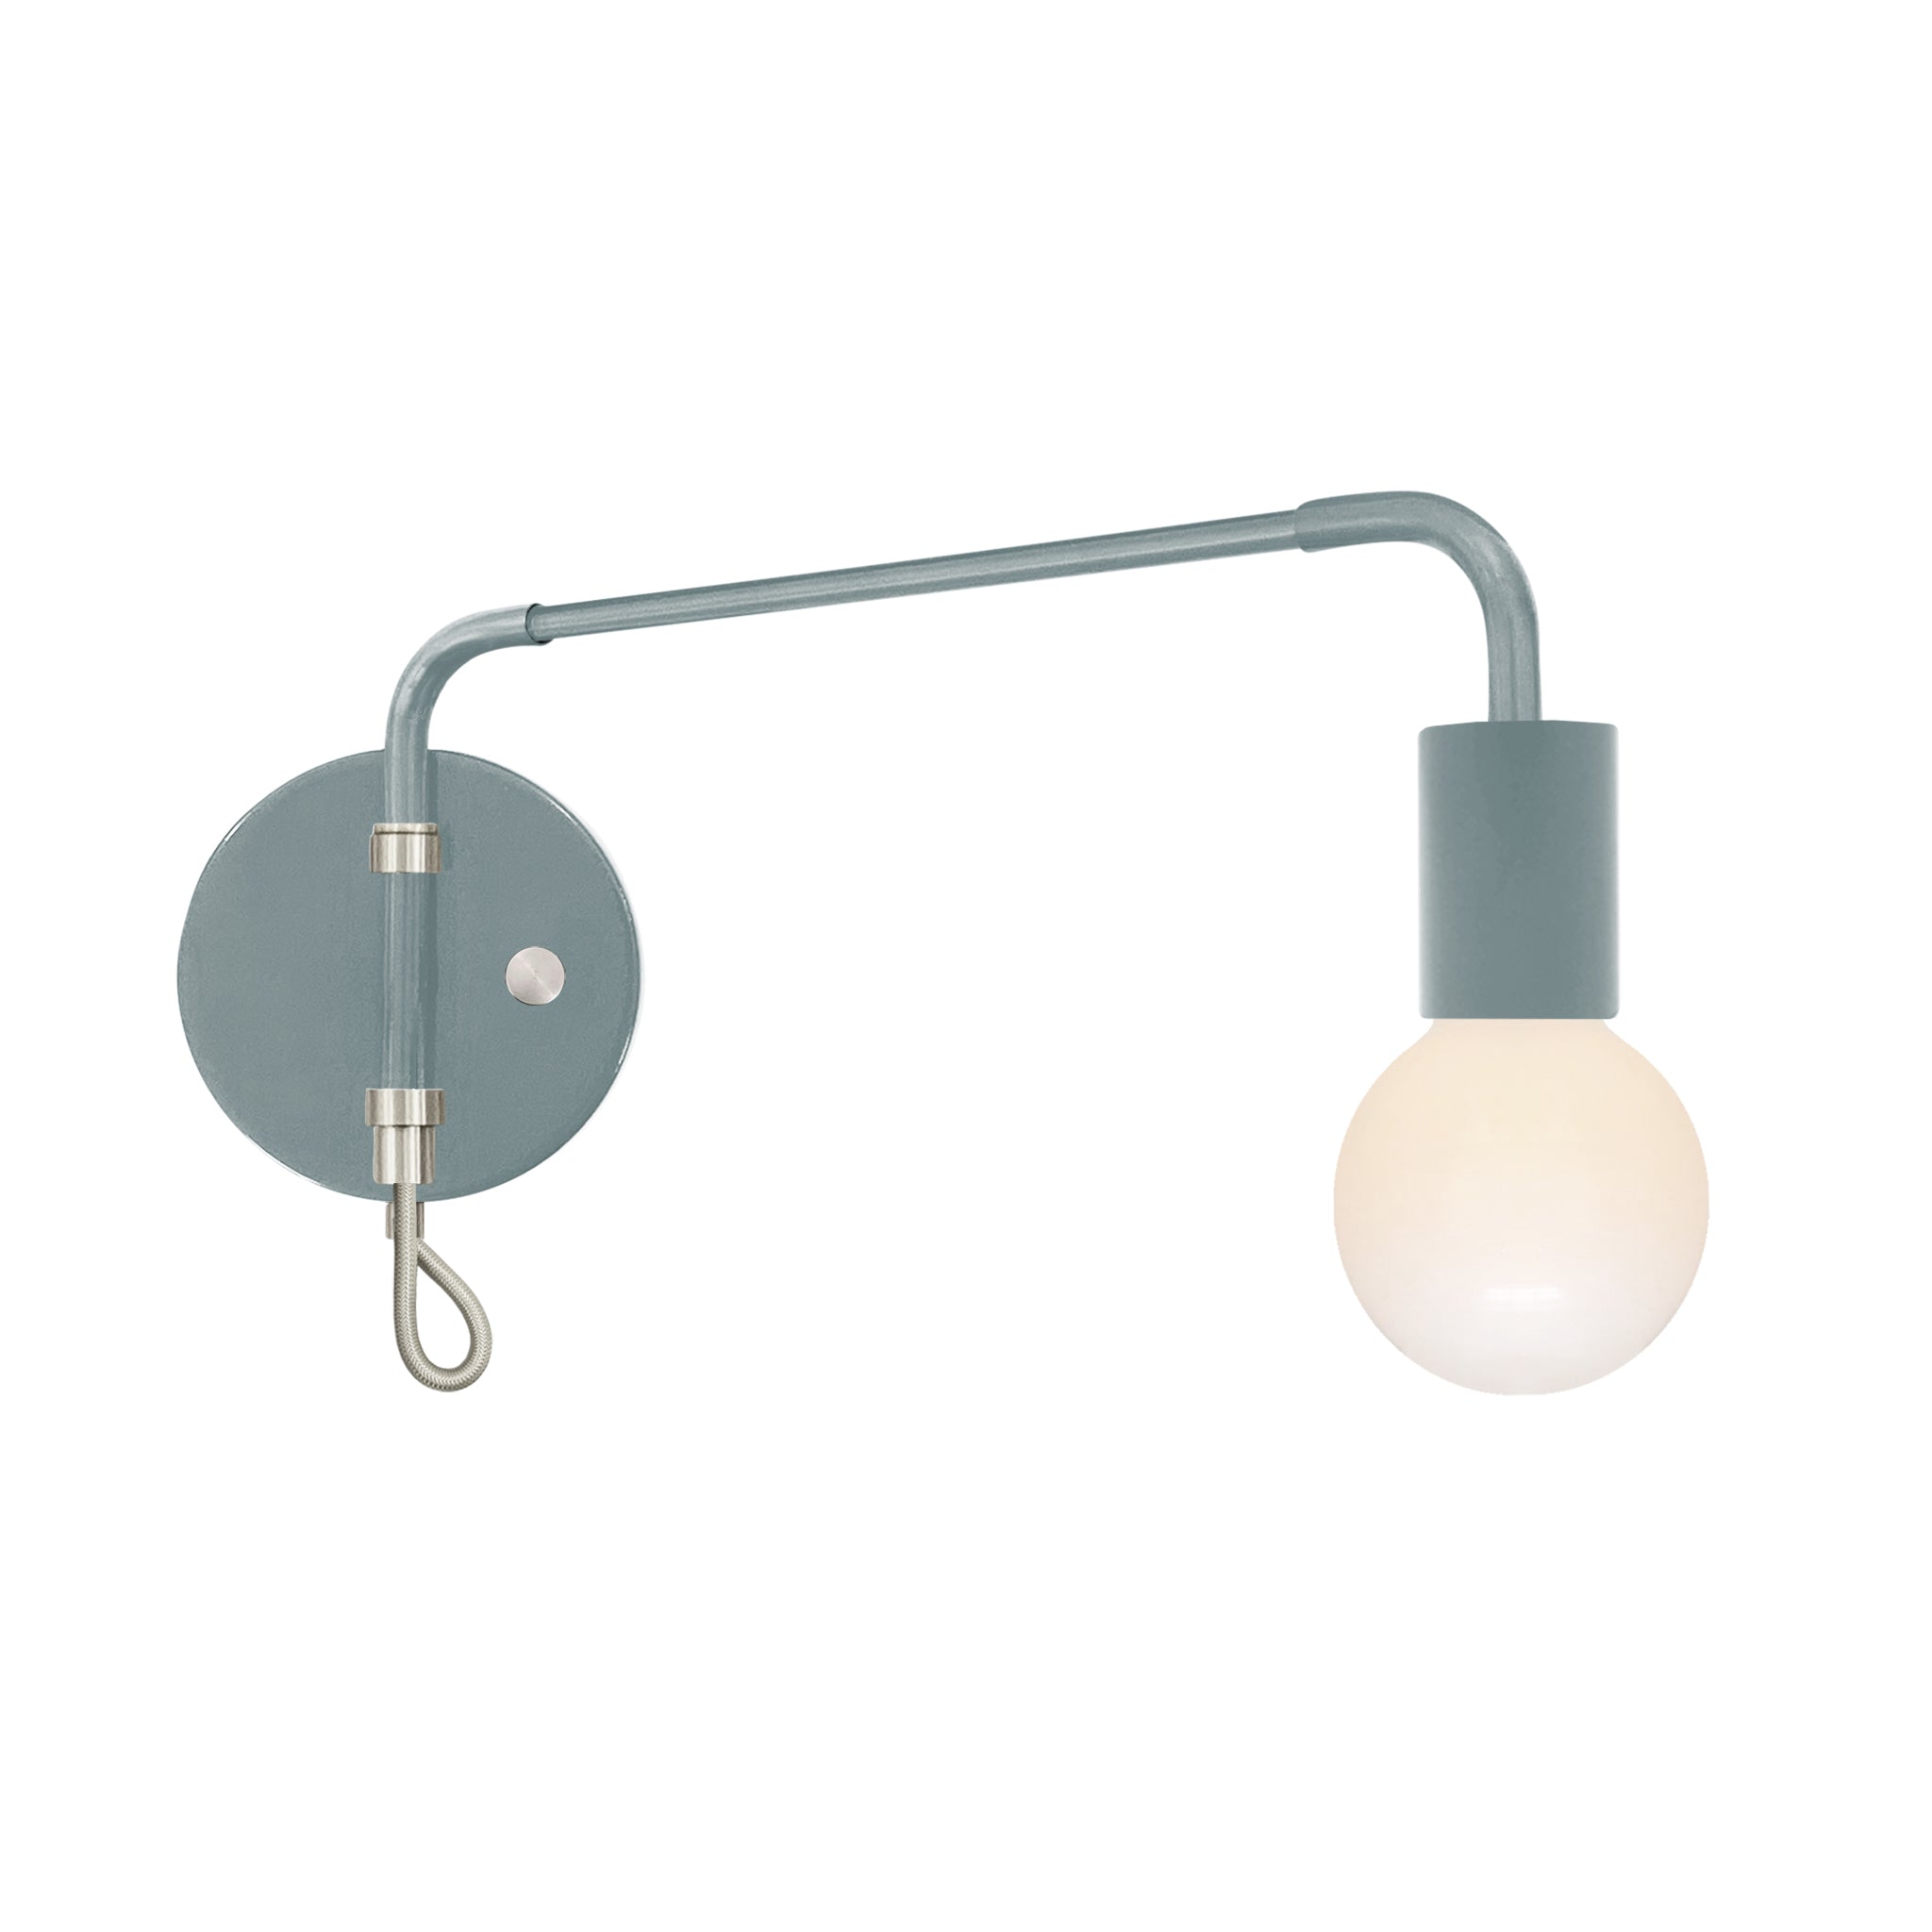 Nickel and python green color Sway sconce Dutton Brown lighting